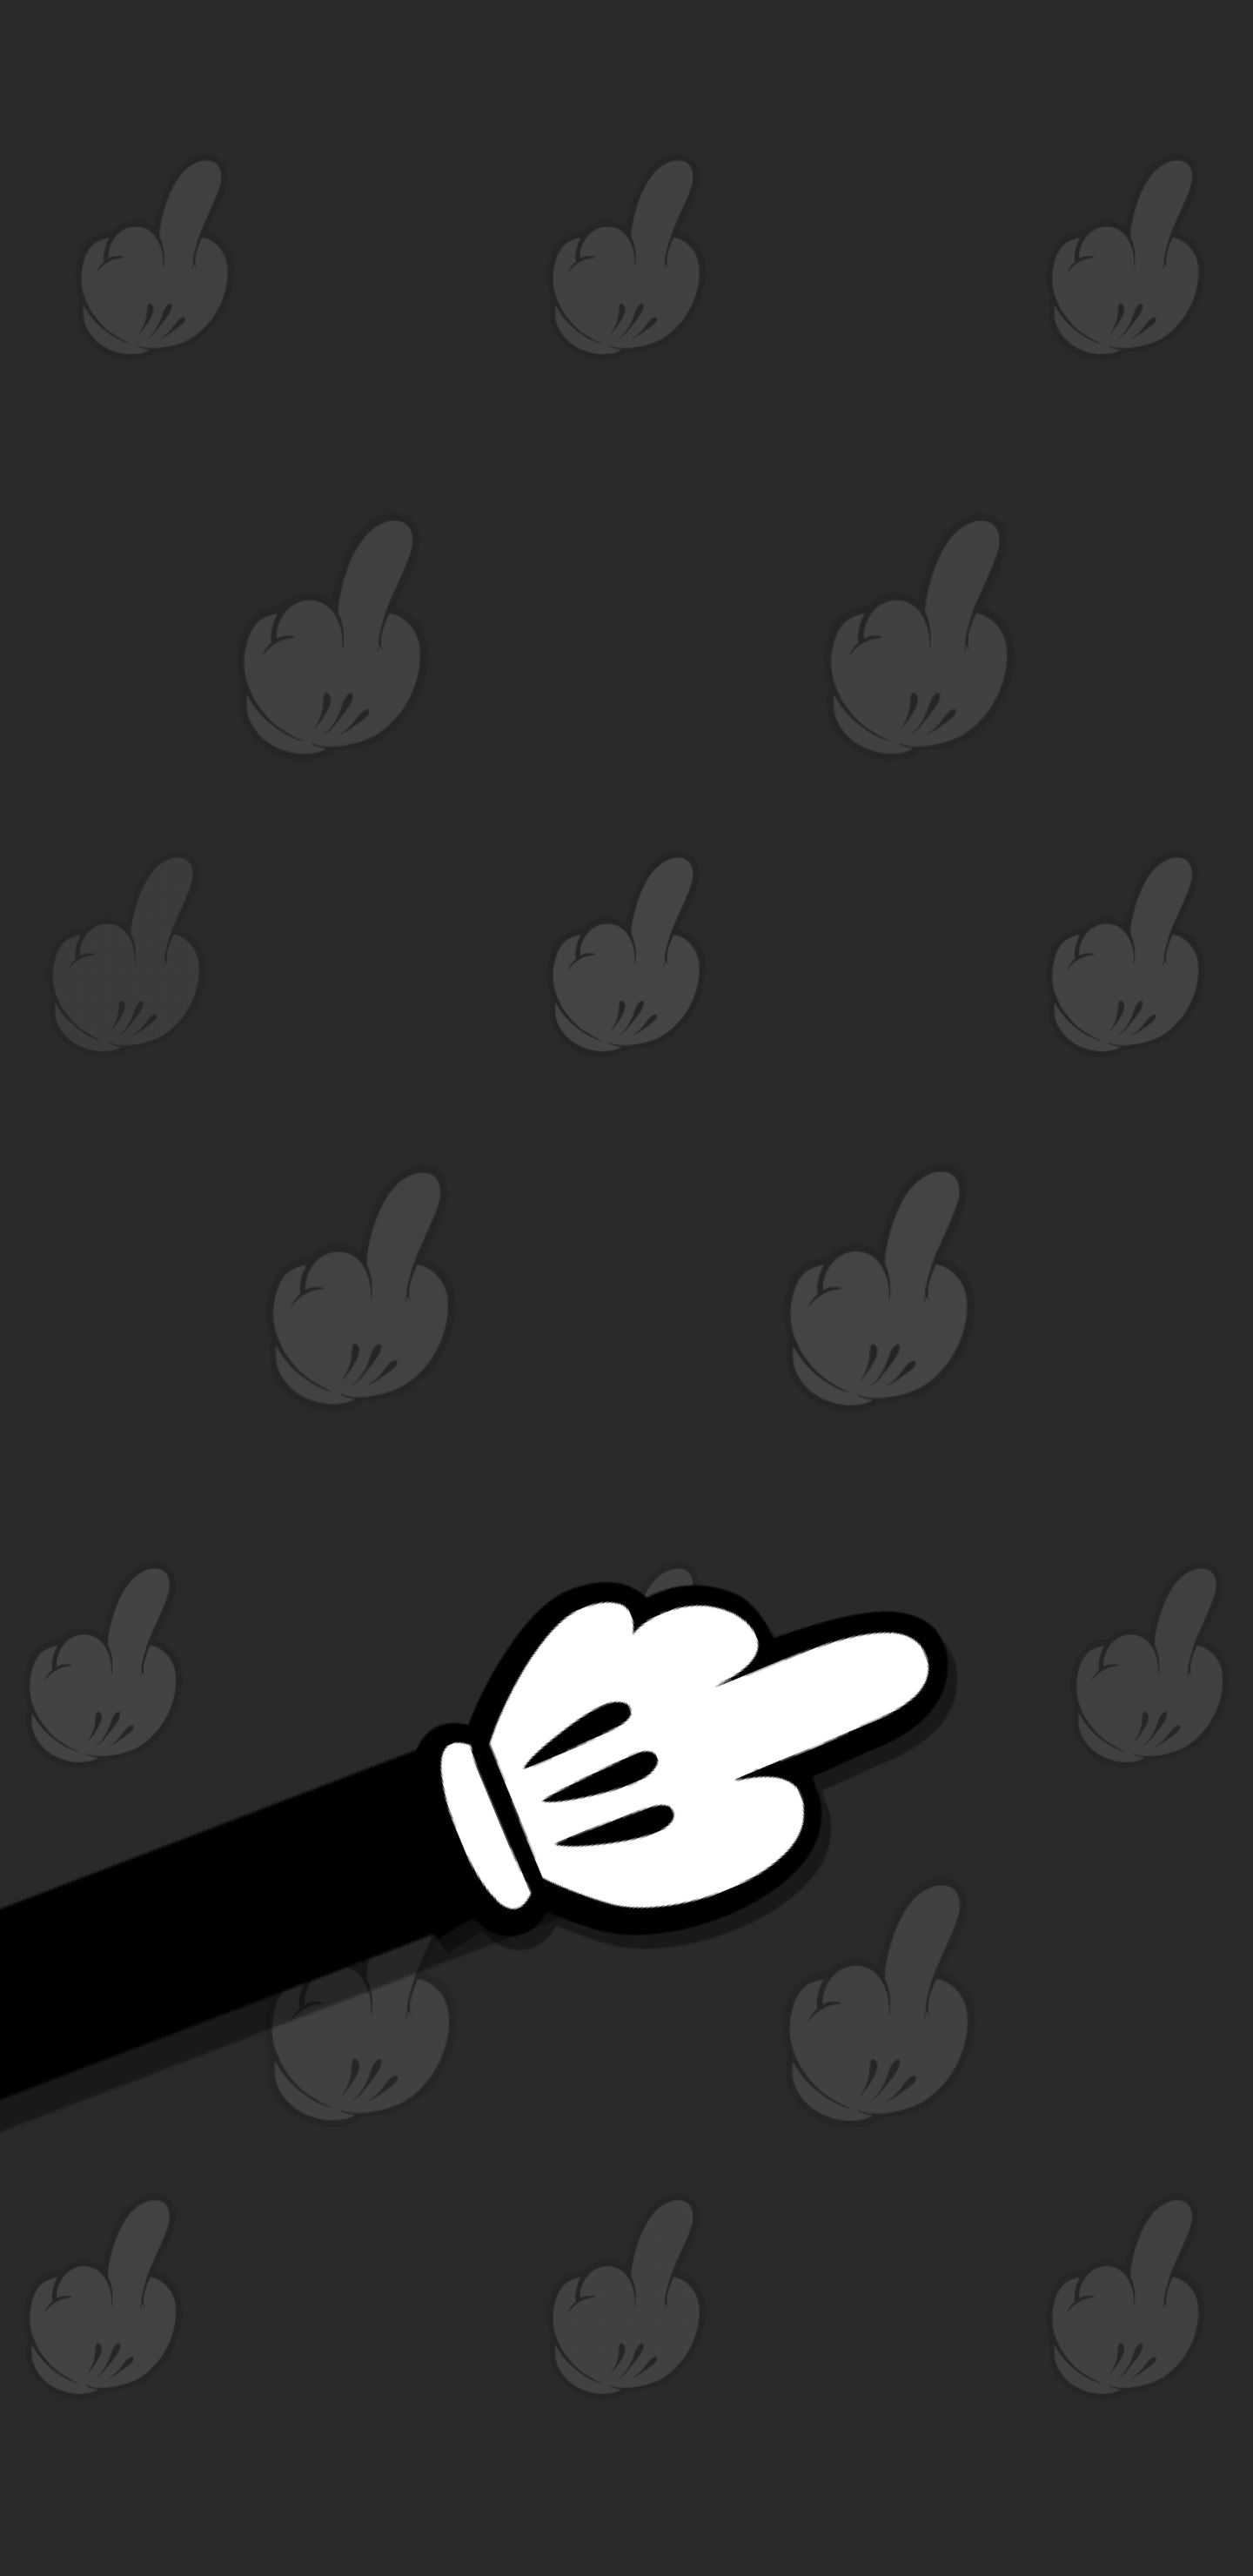 Middle Finger Wallpaper Android - KoLPaPer - Awesome Free HD Wallpapers